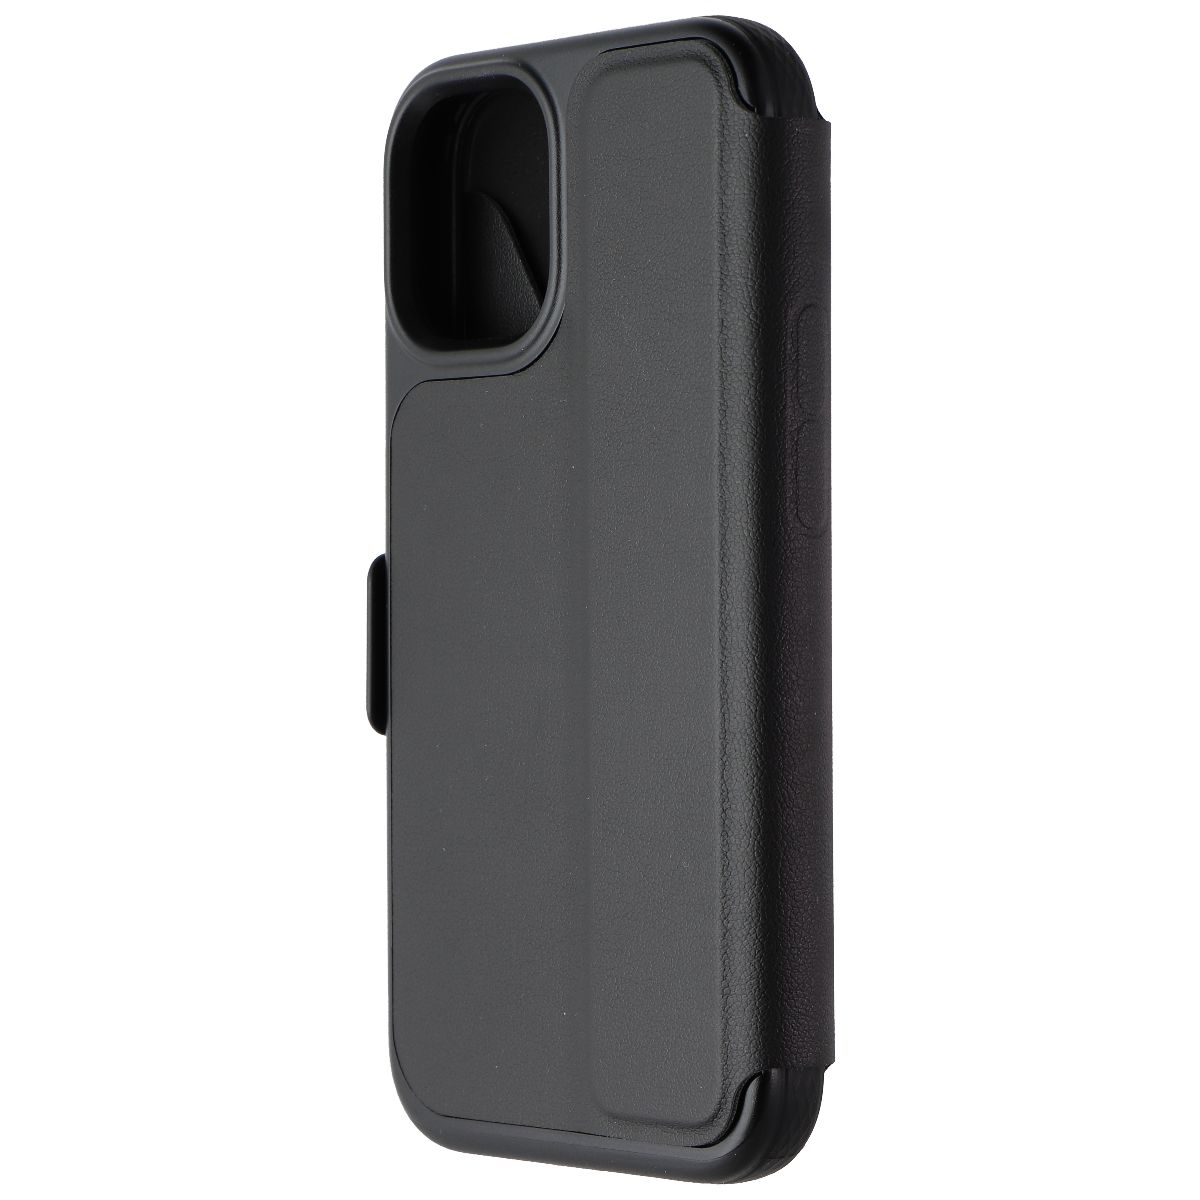 Tech21 Evo Wallet Protective Case For Apple IPhone 12 Mini - Black (Refurbished)